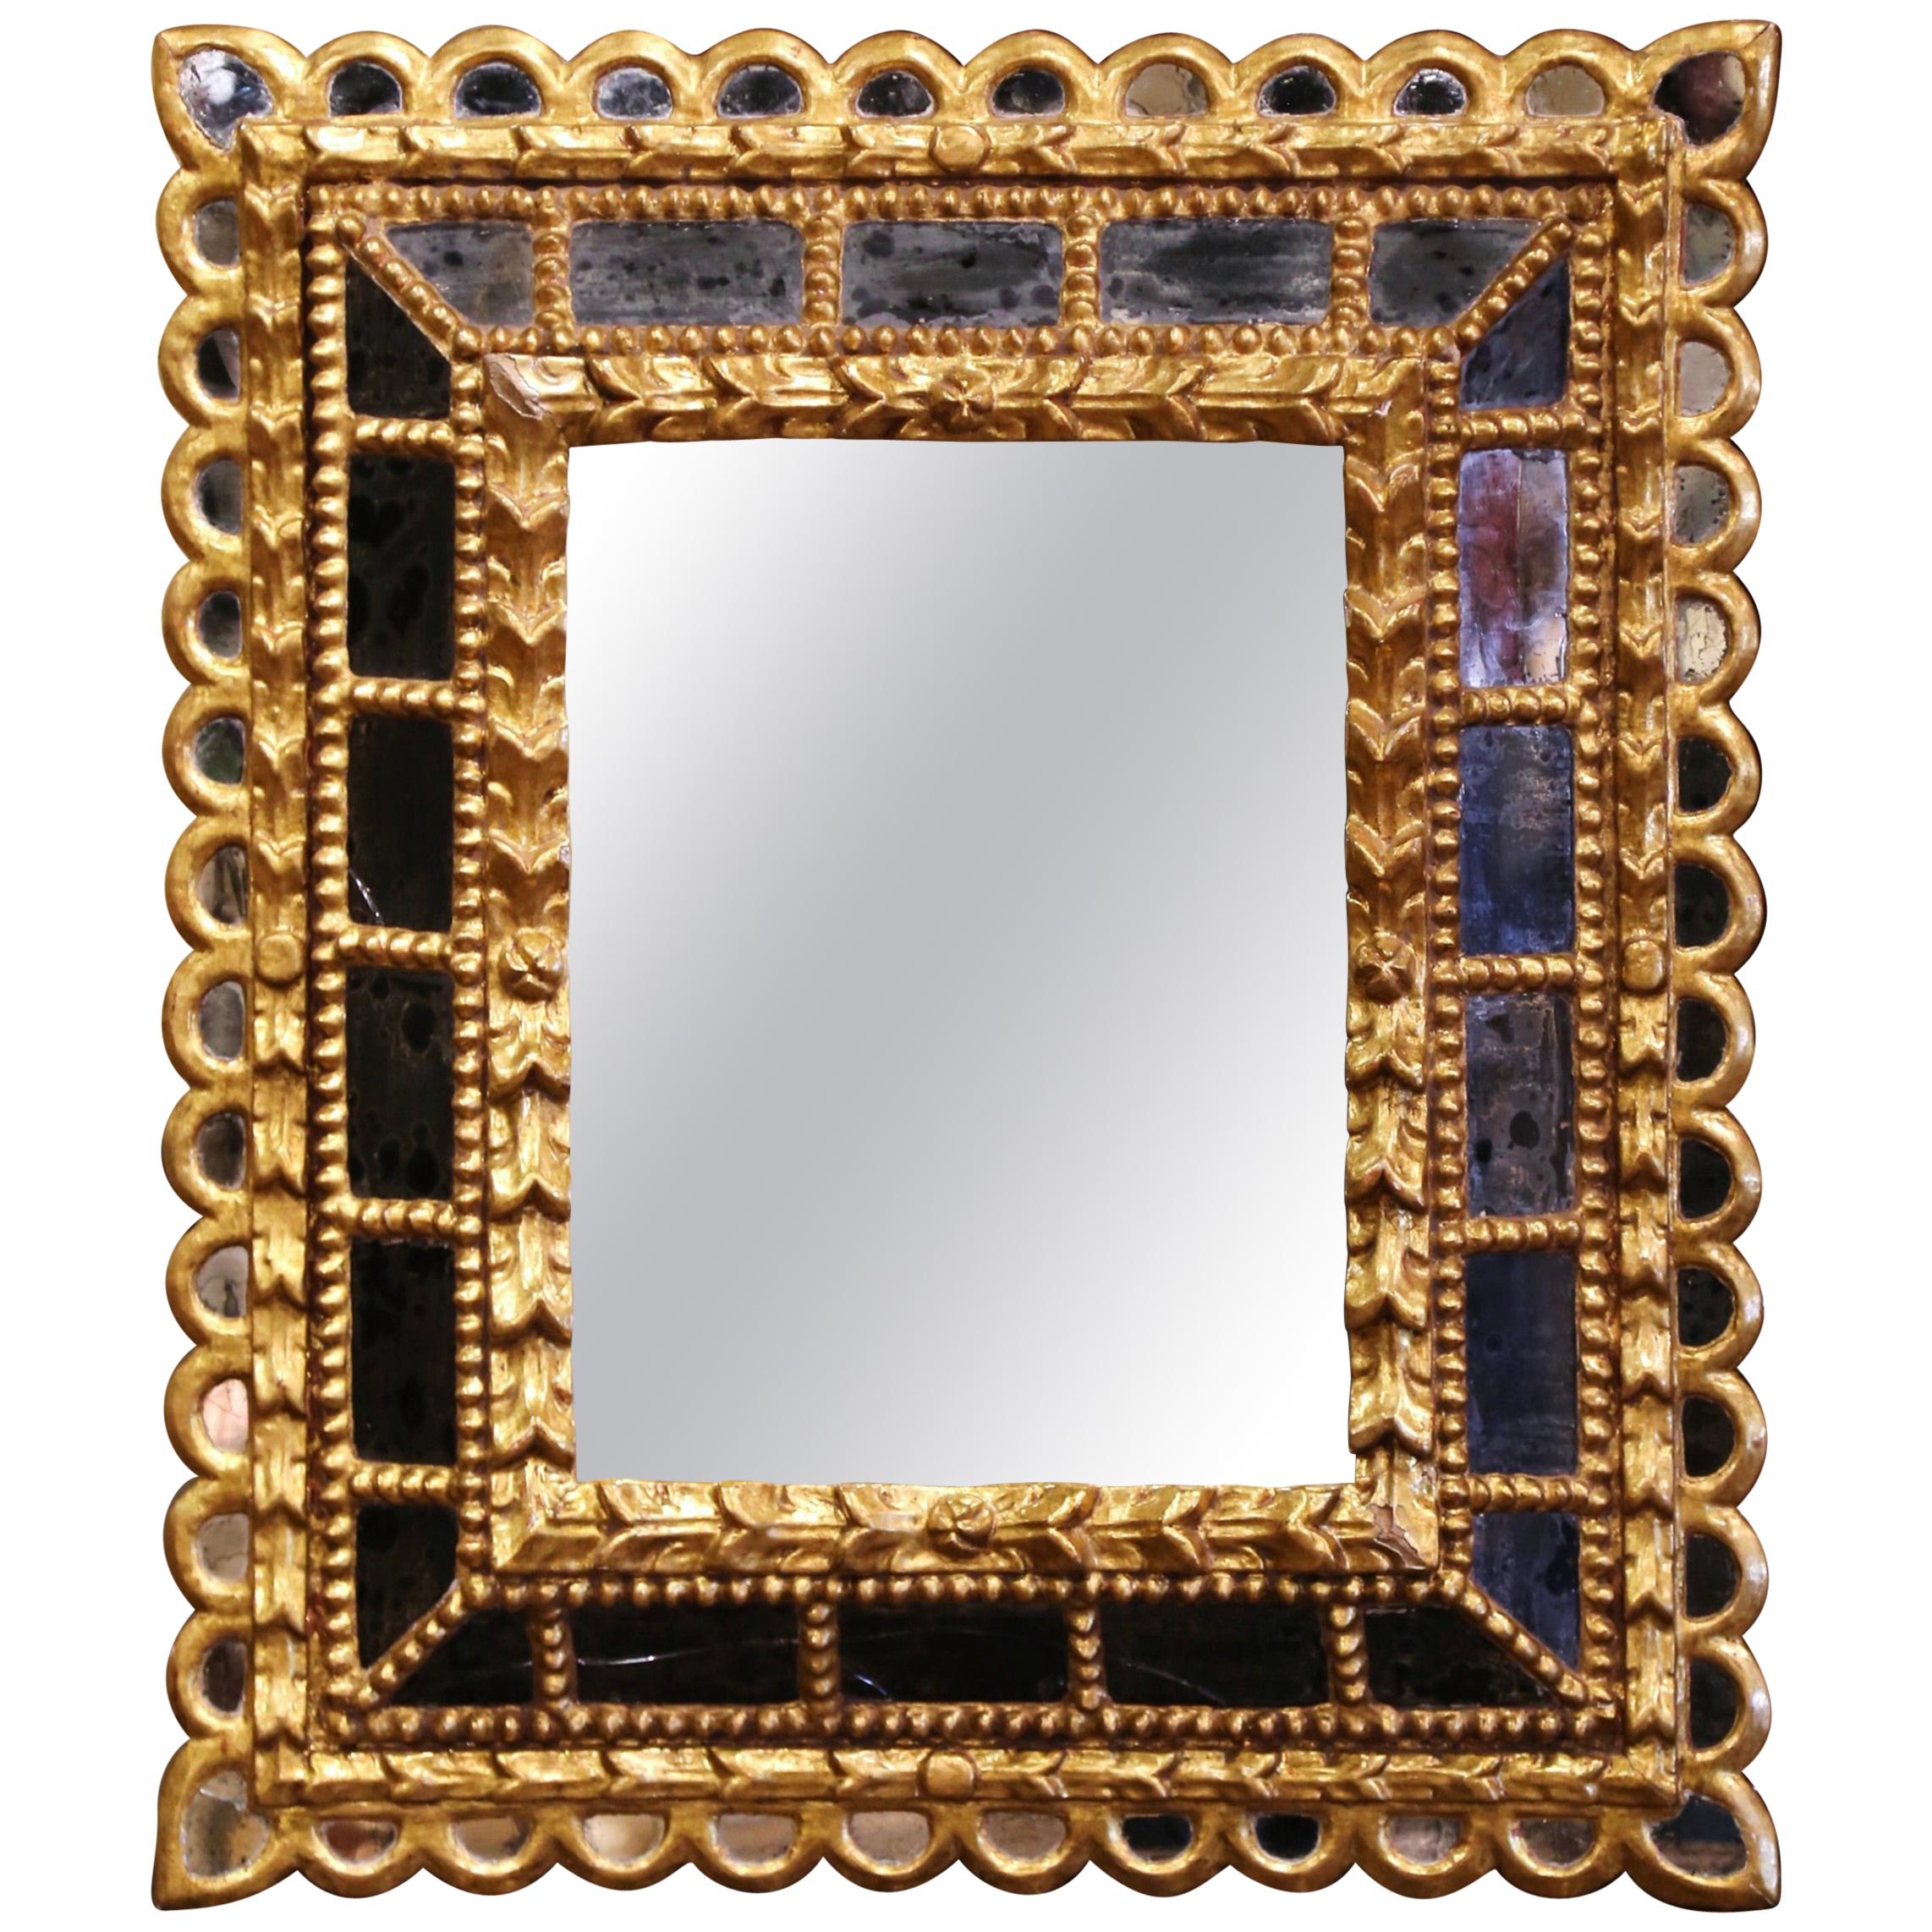 Early 20th Century French Giltwood Sunburst Mirror with Overlay Recessed Glass